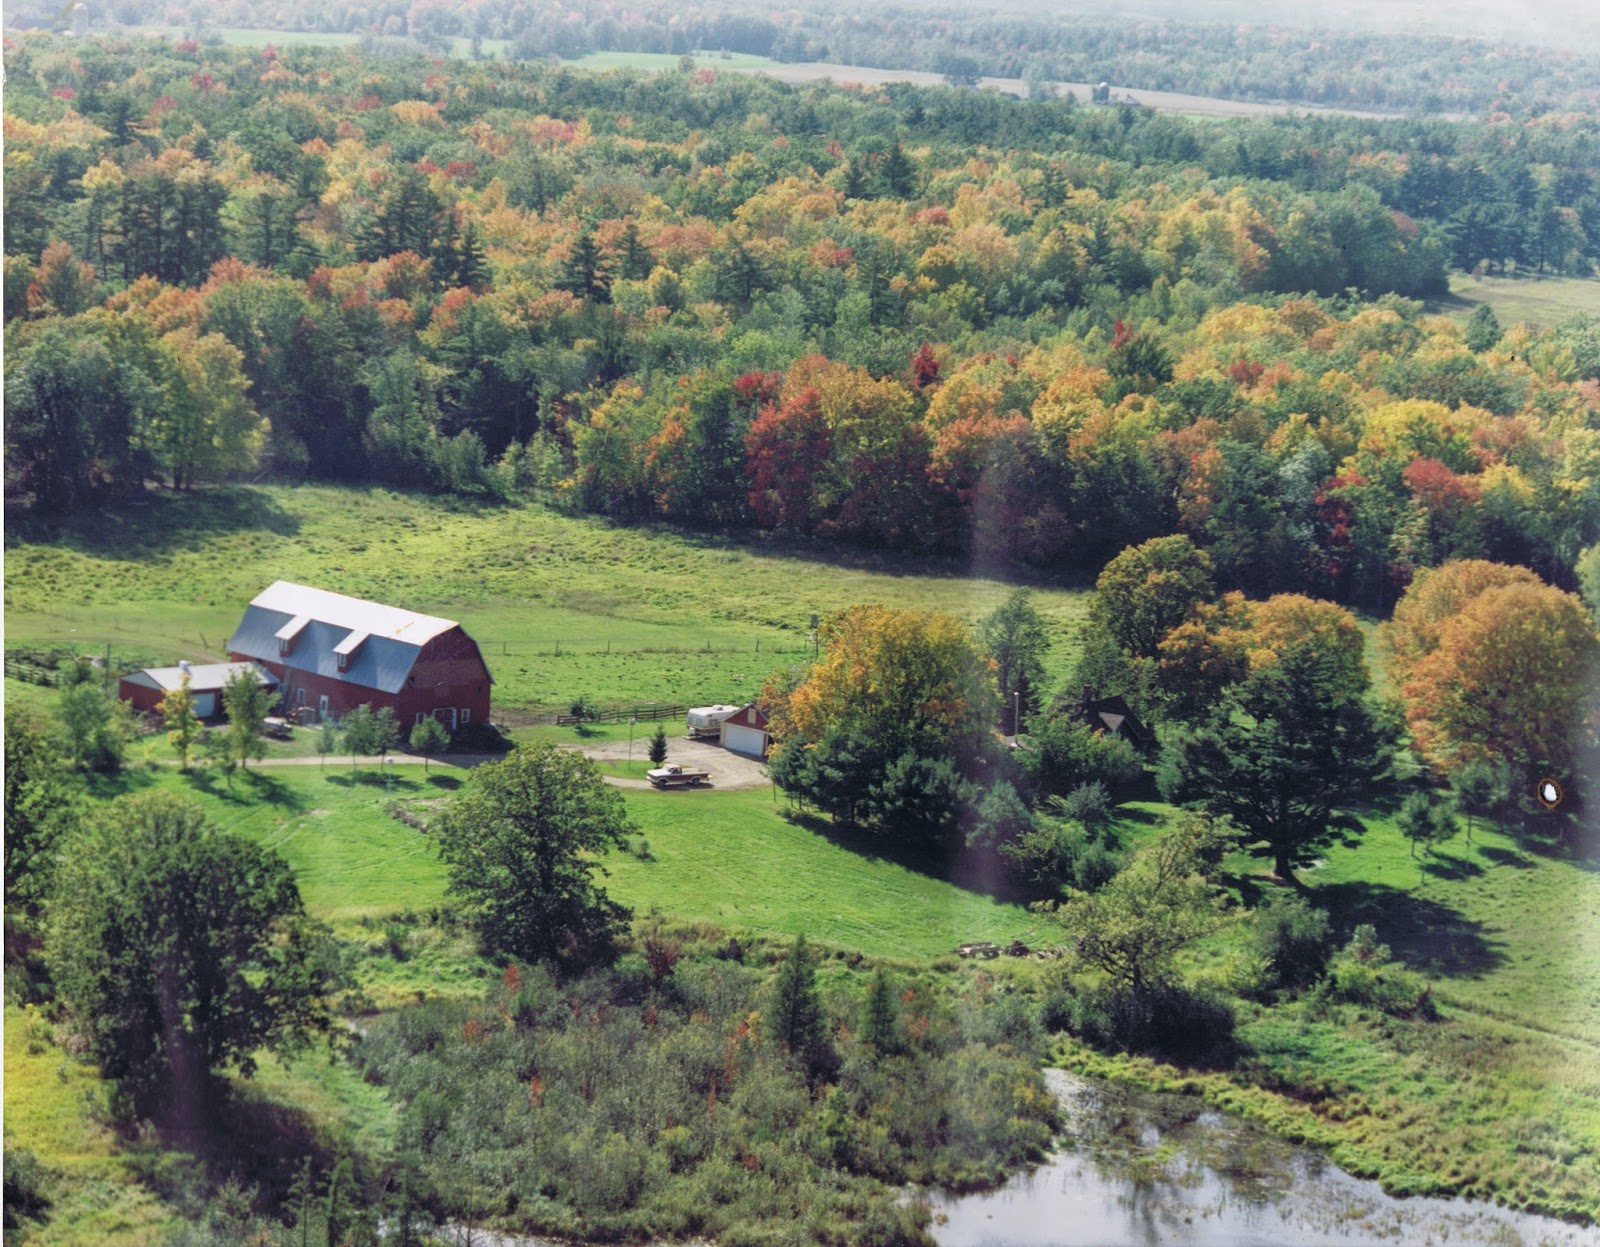 aerial view of Northern Heritage Farm in the mid-1990s